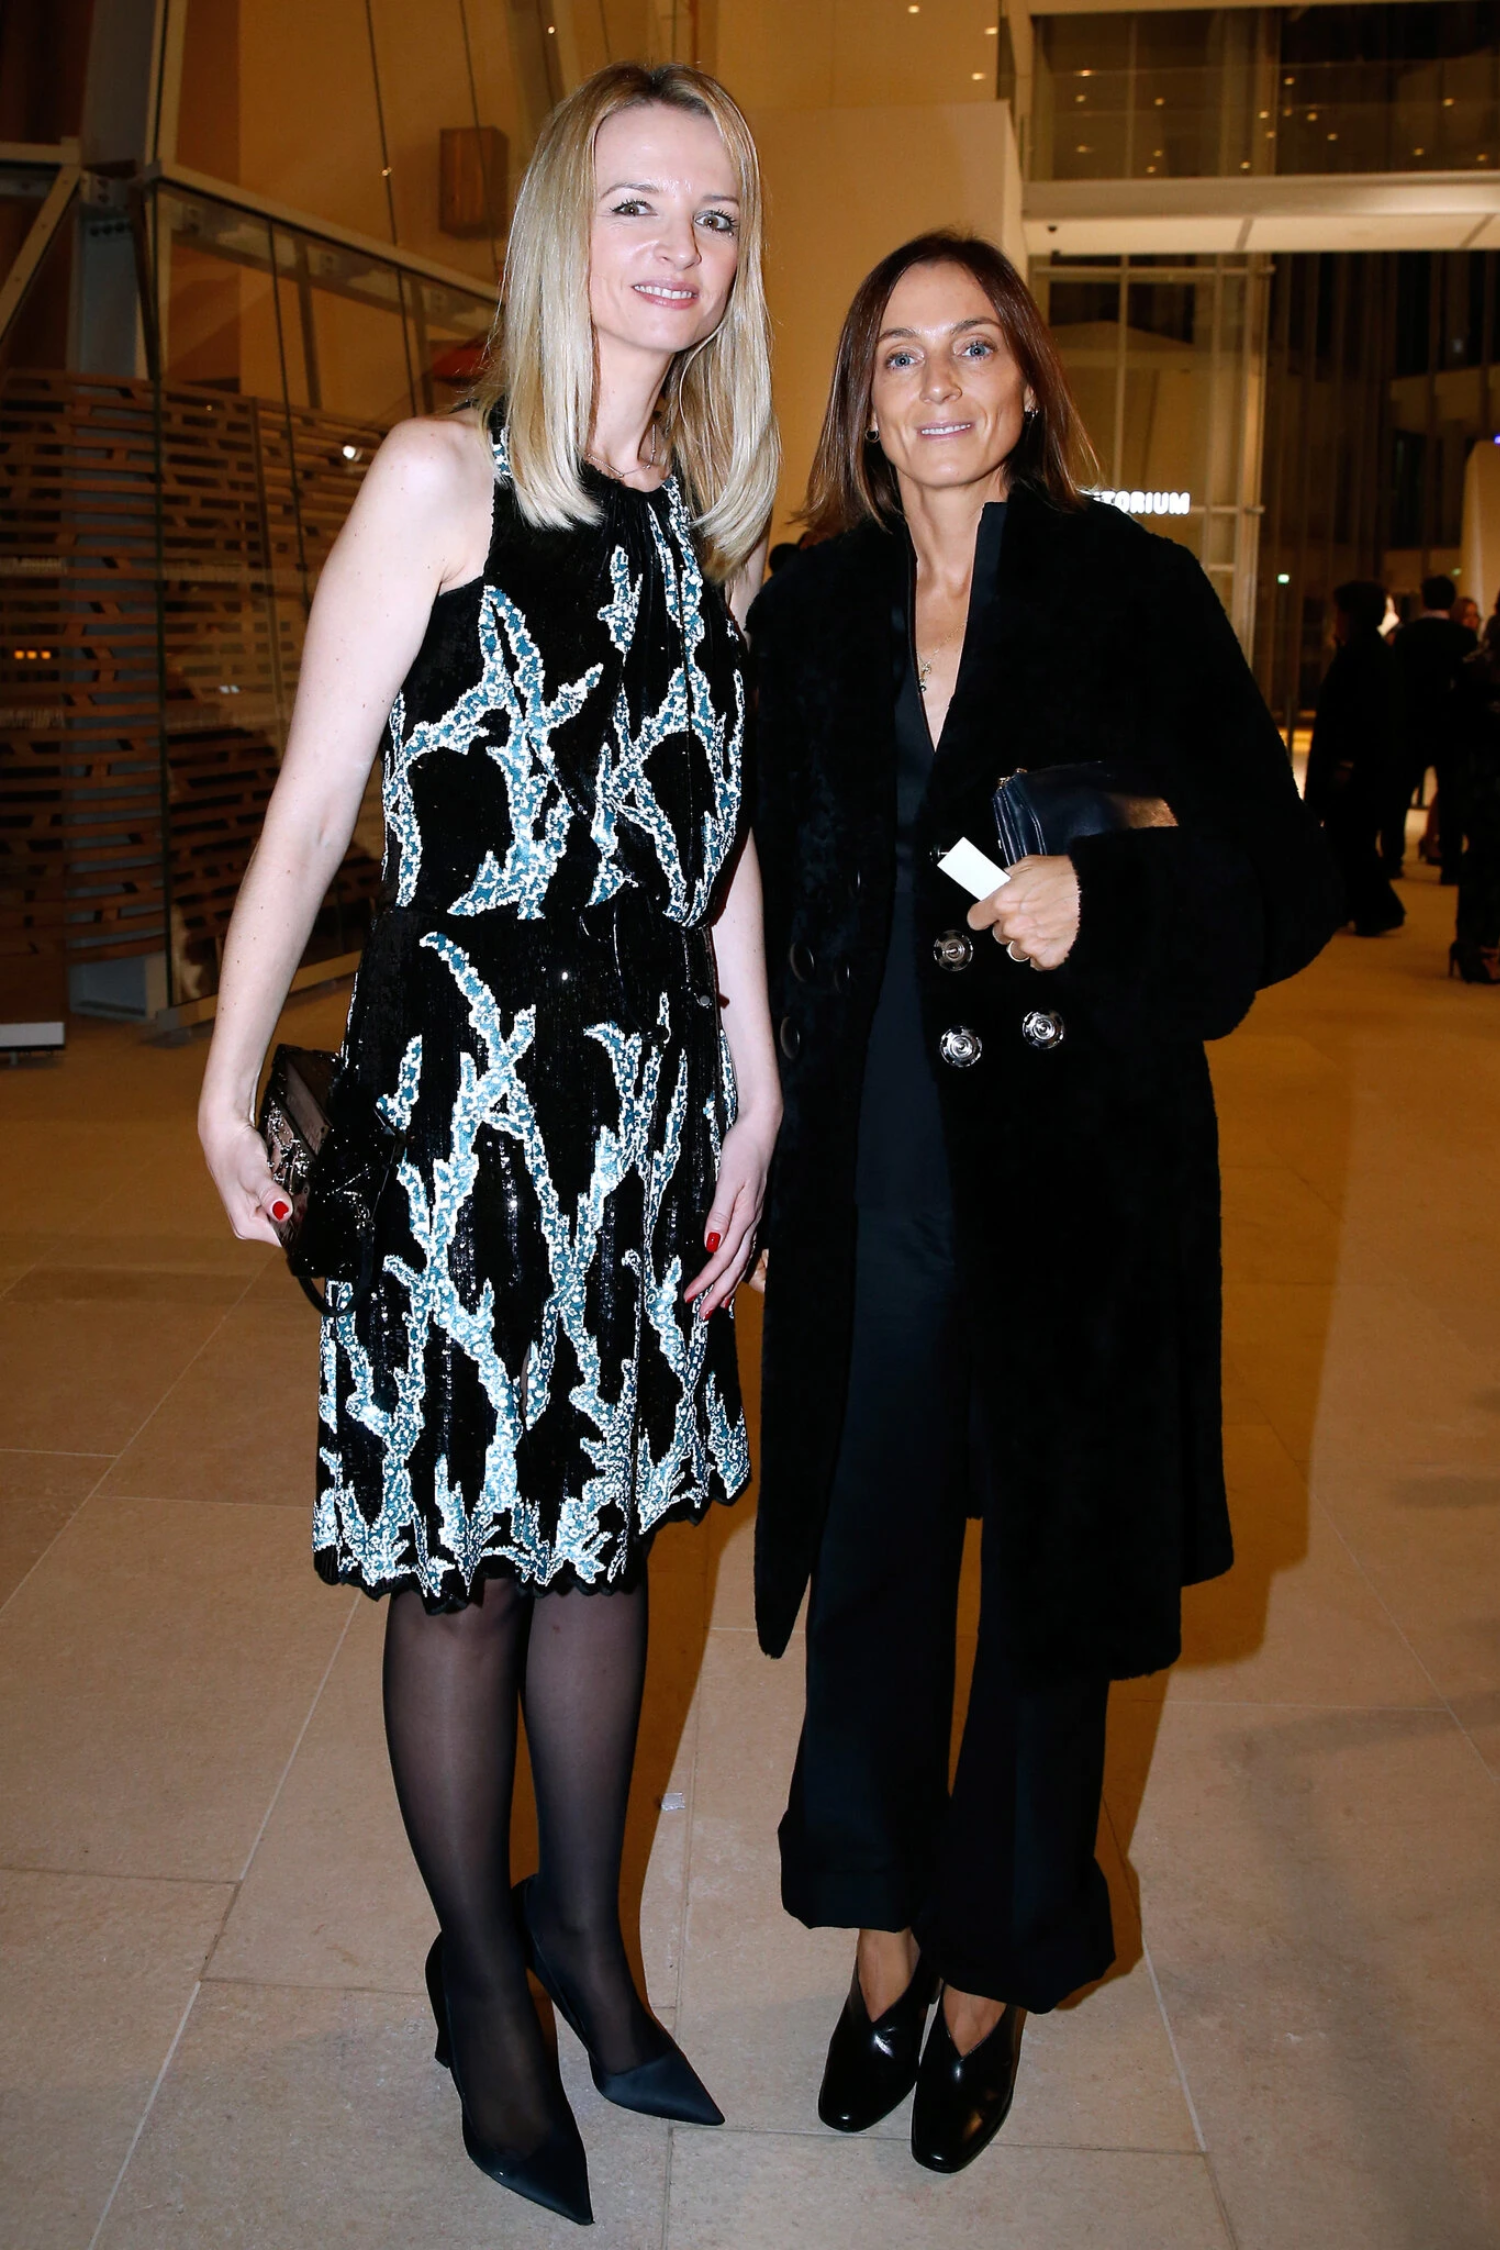 with Delphine Arnualt of LVMH at the opening of the Foundation Louis Vuitton in Boulogne-Billancourt, France, in 2014.